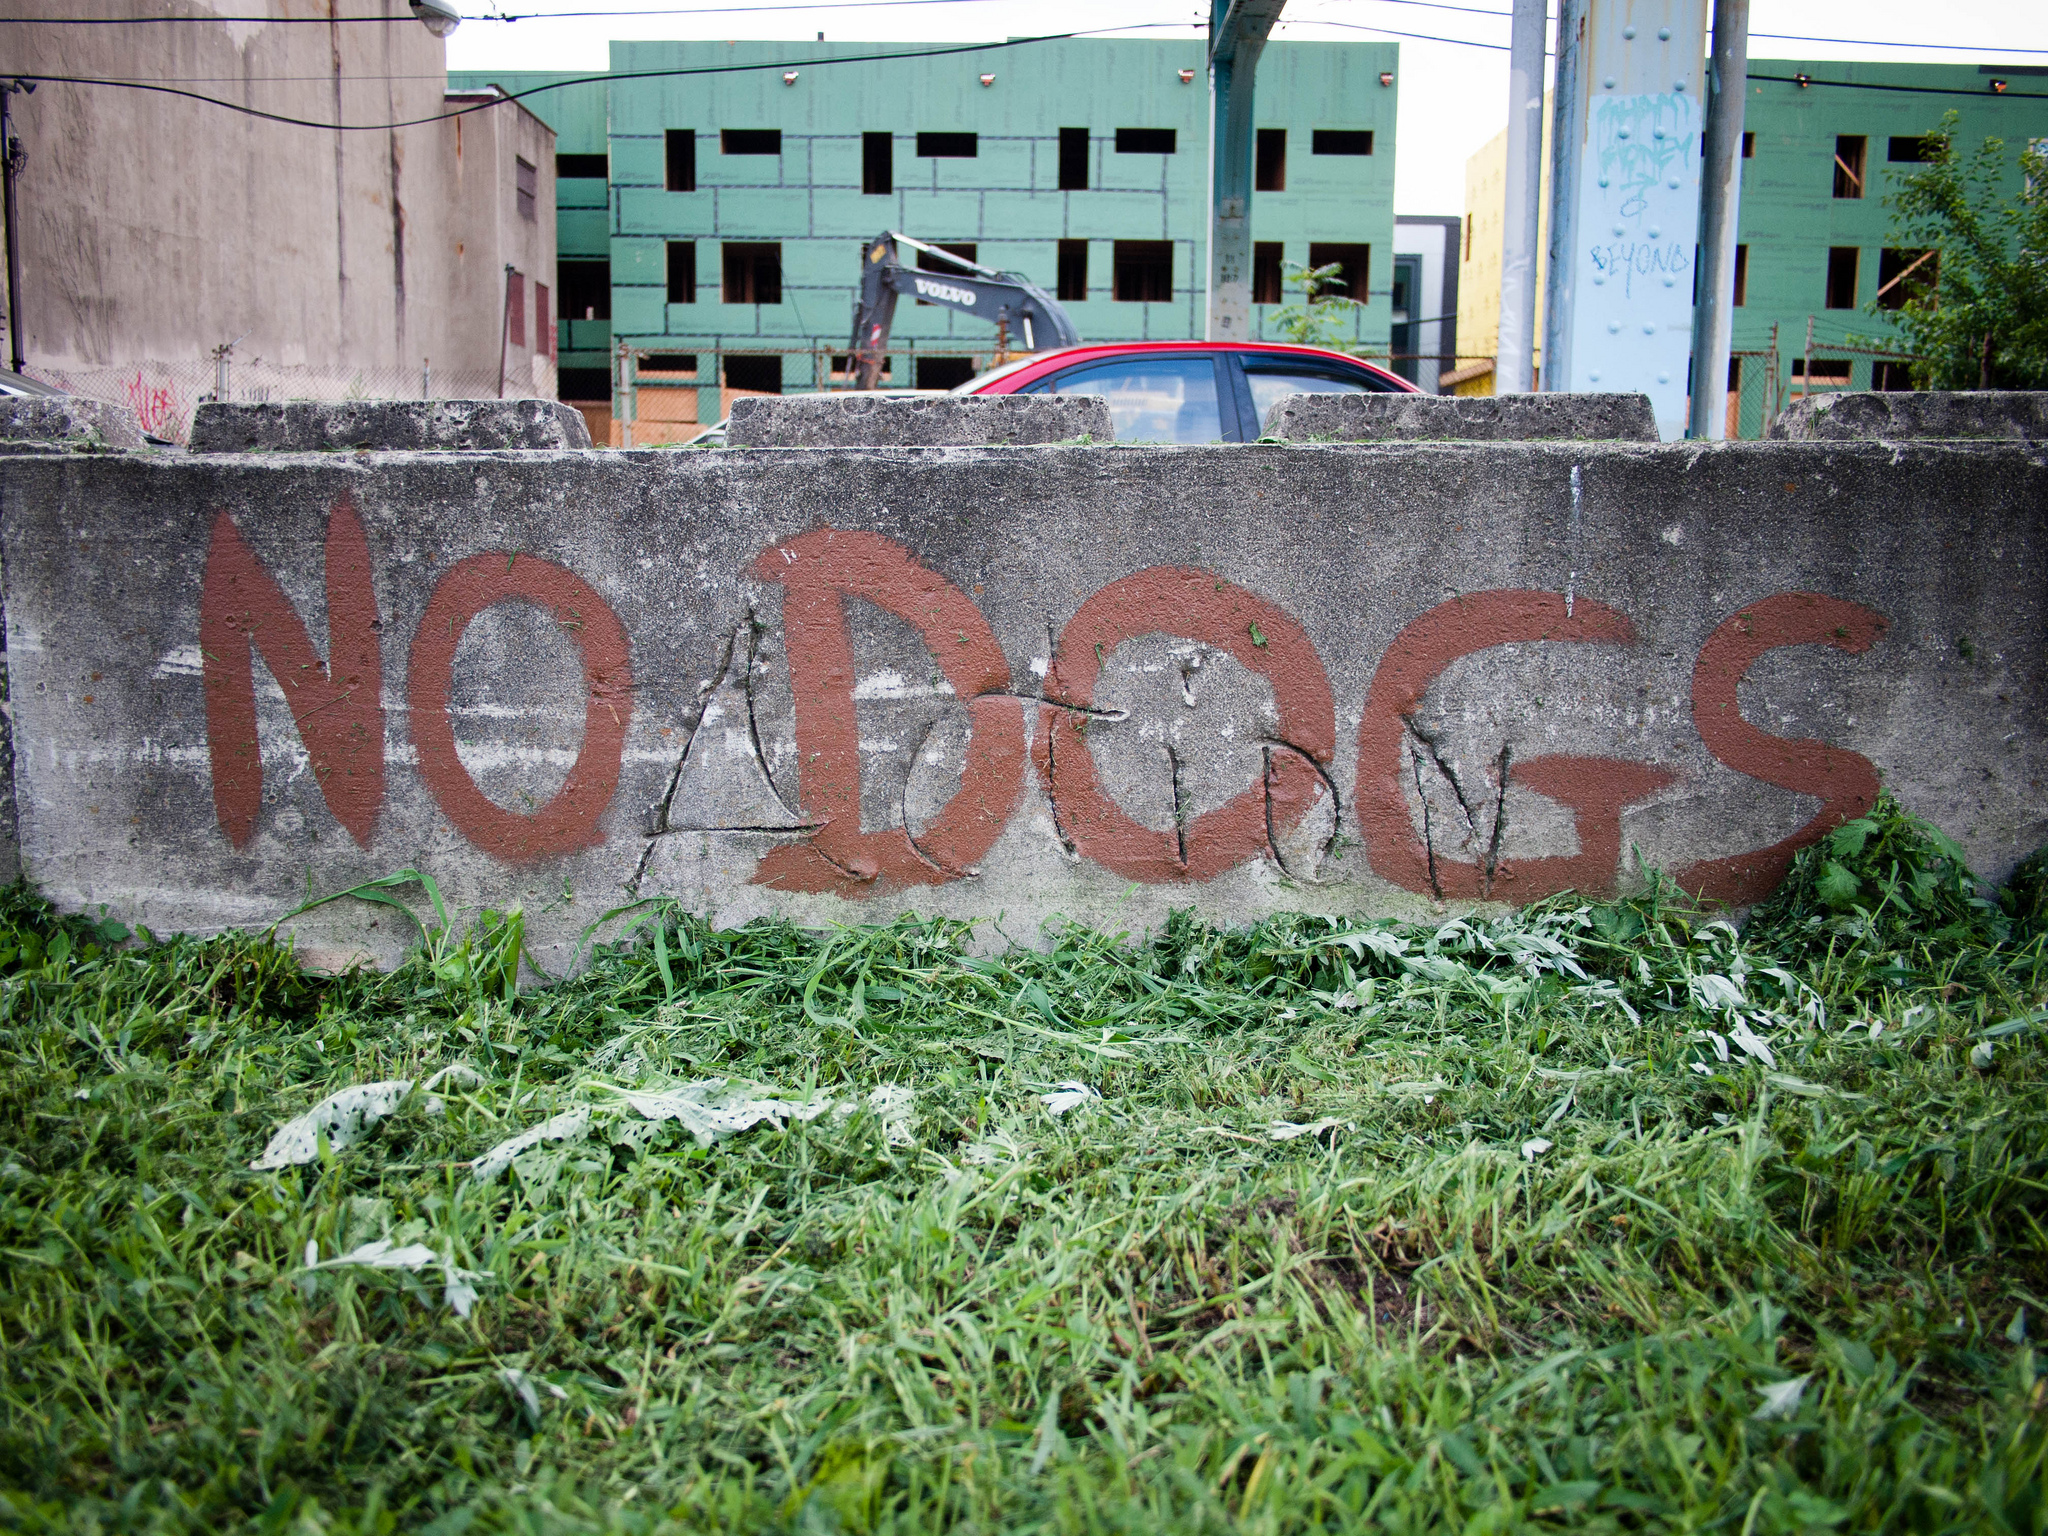 "No Dogs" spray-painted on a concrete divider.